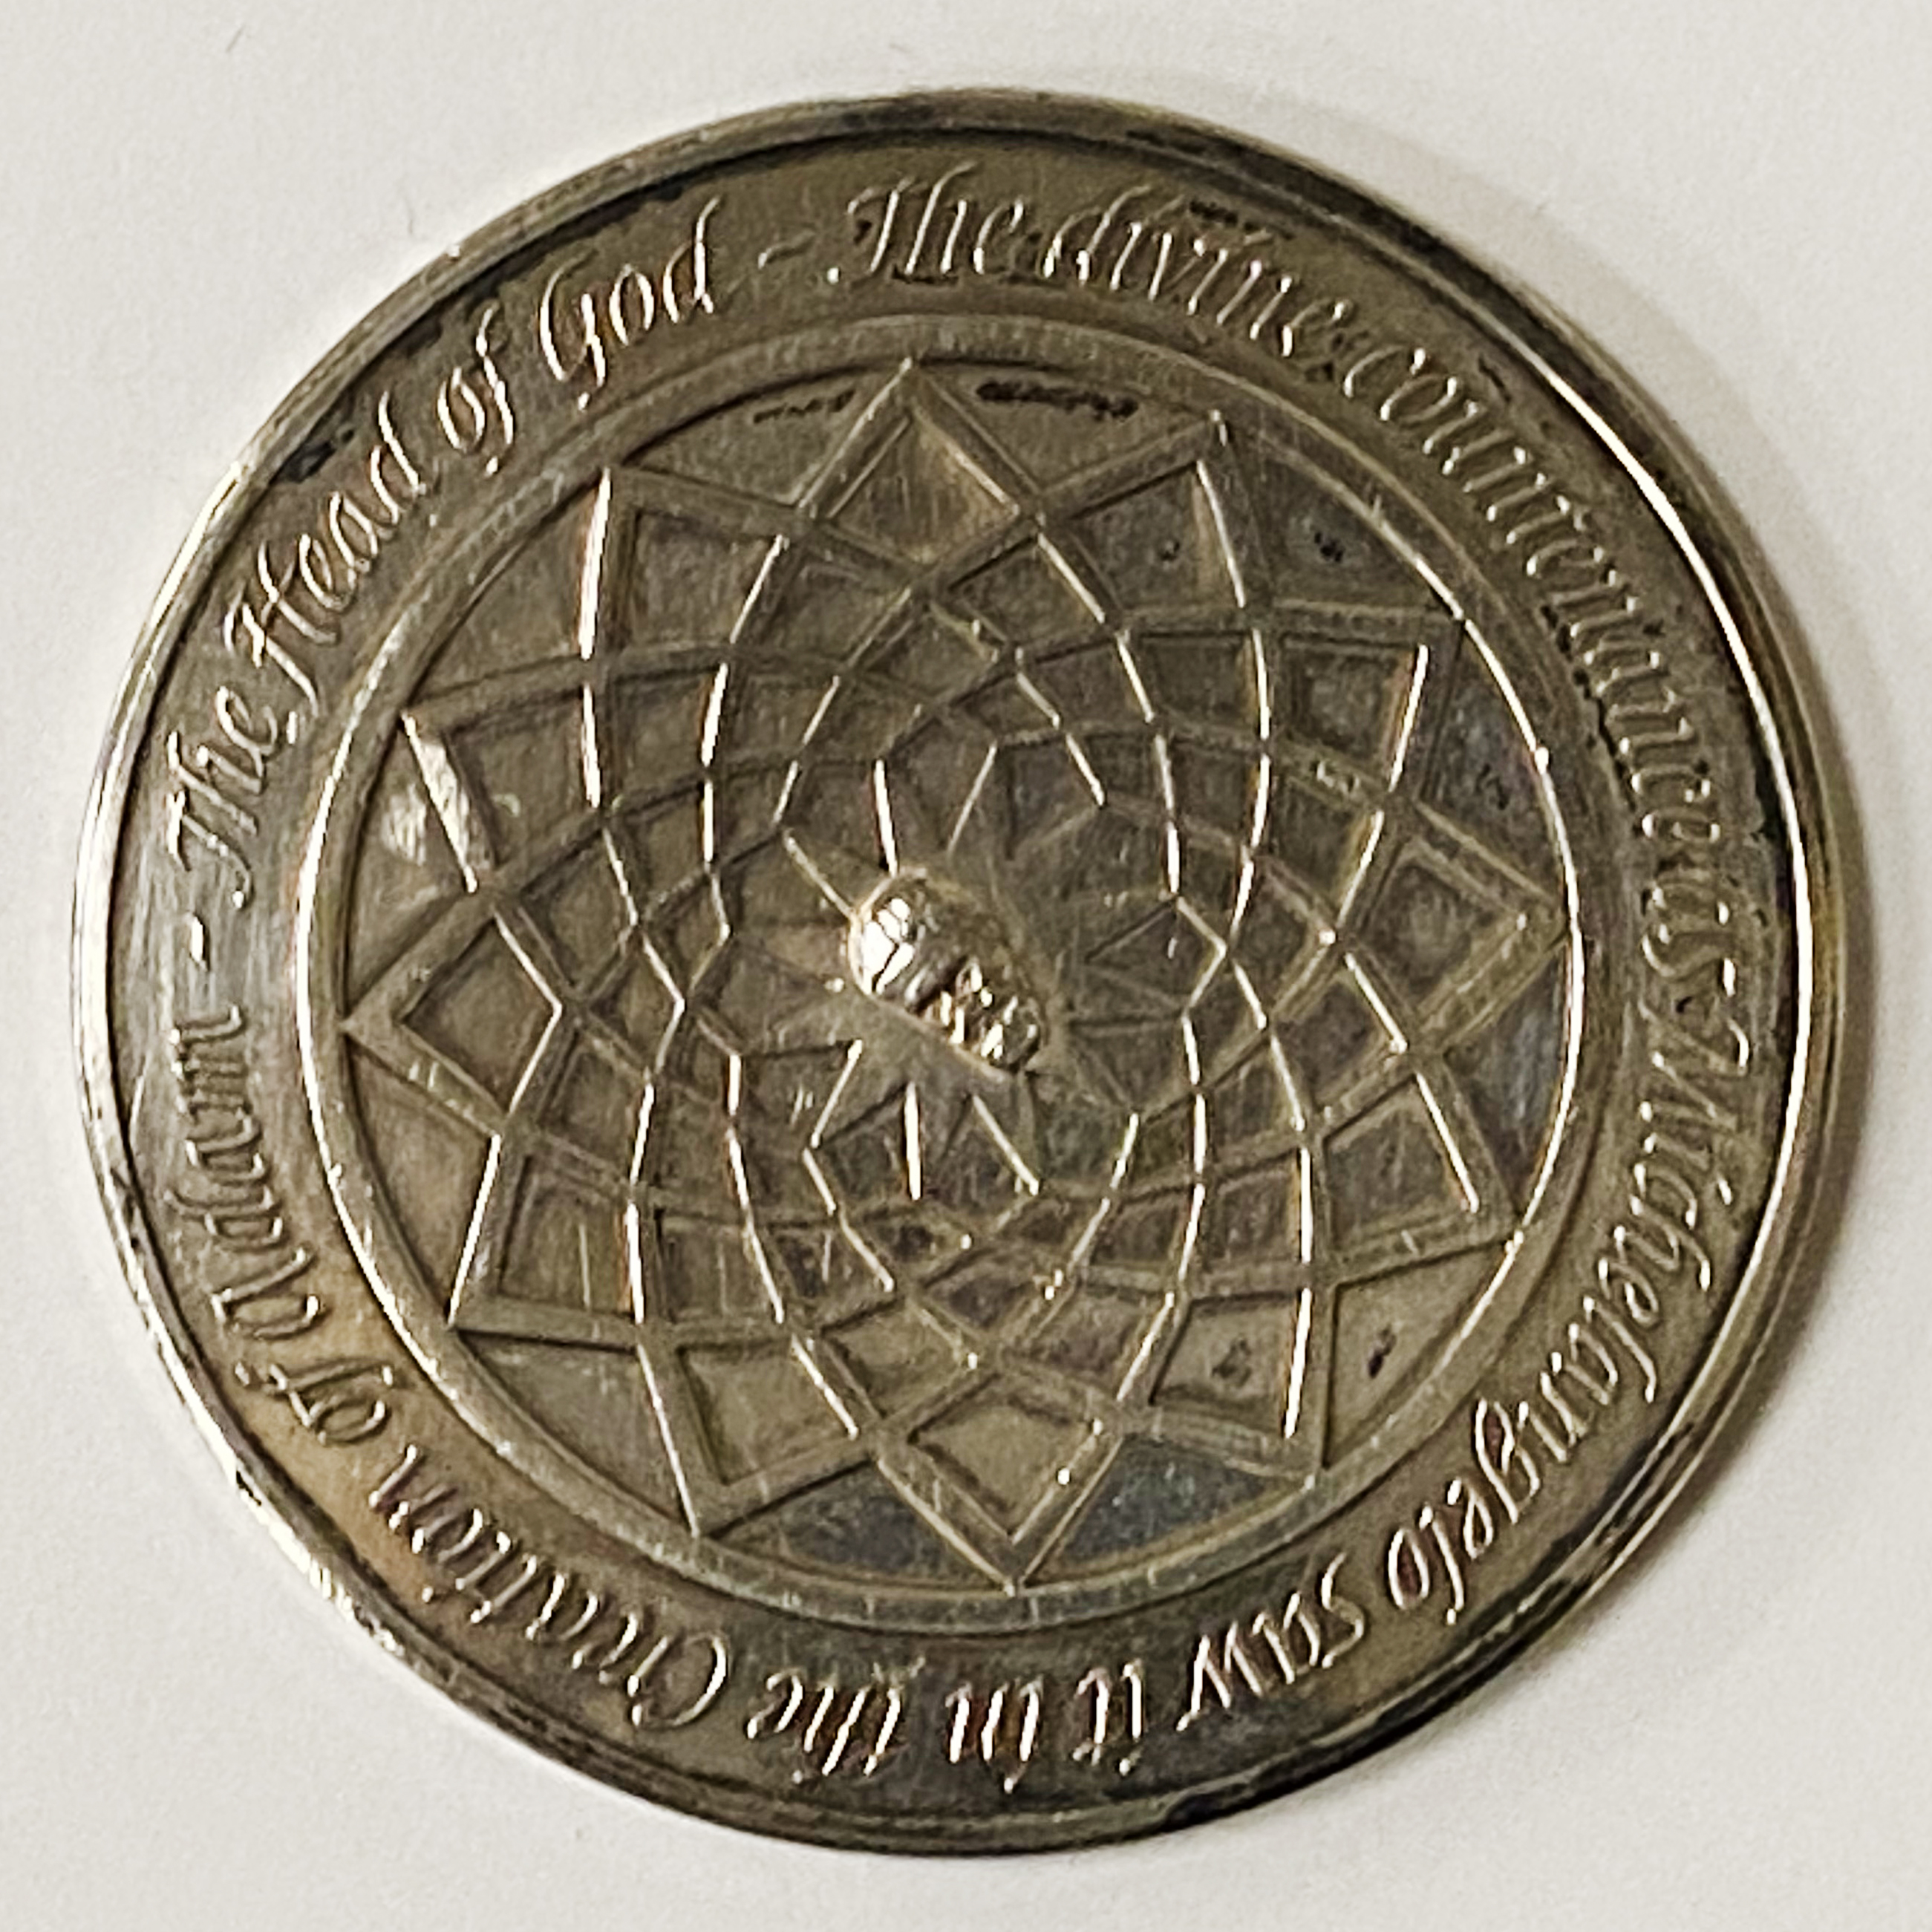 P.MONASSI STERLING SILVER PROOF MEDAL - Image 2 of 2